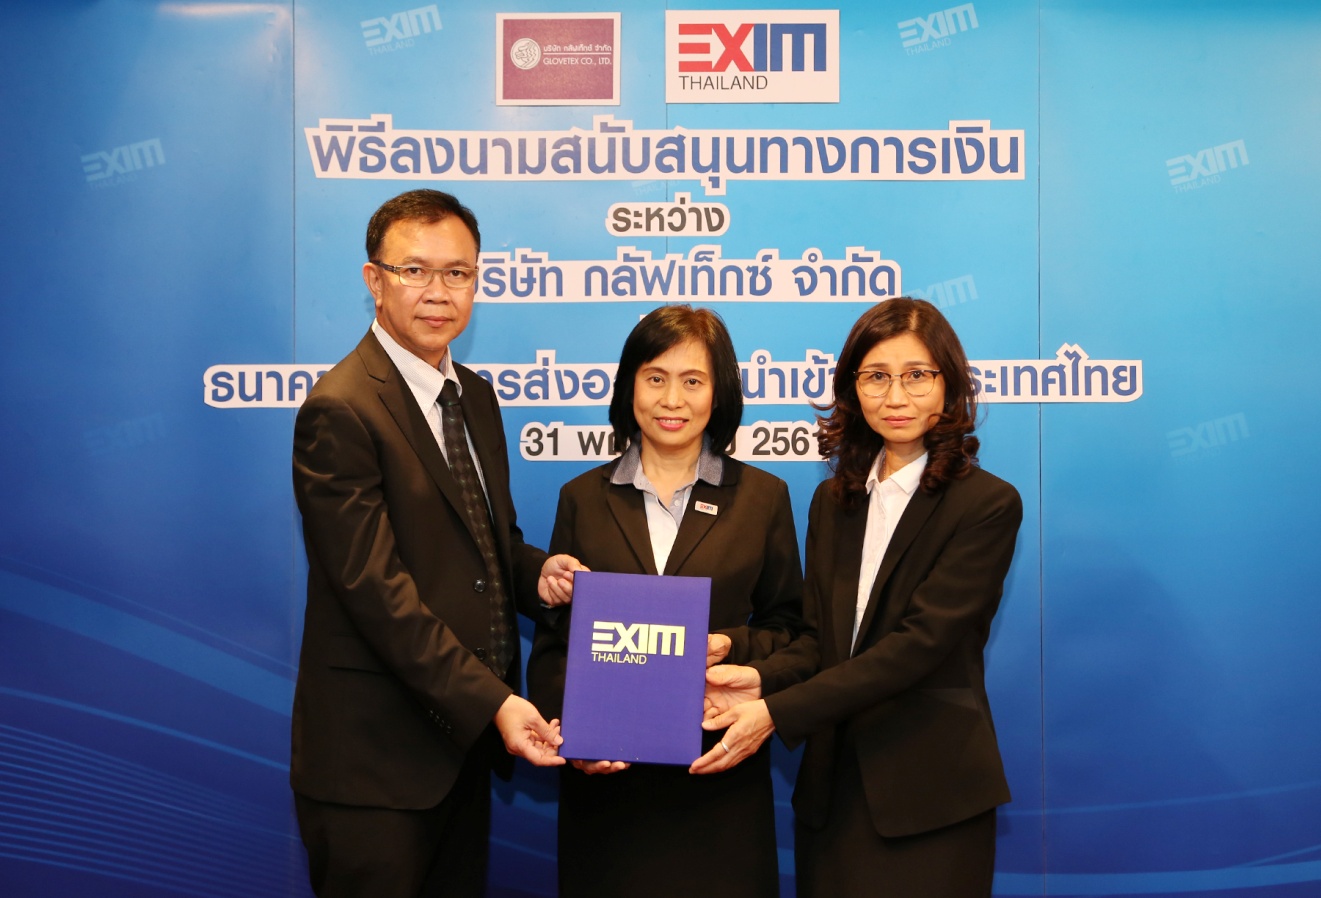 EXIM Thailand Finances Glovetex Co., Ltd.’s Industrial Glove Invention under Strategy to Support High-Potential SME Exporters